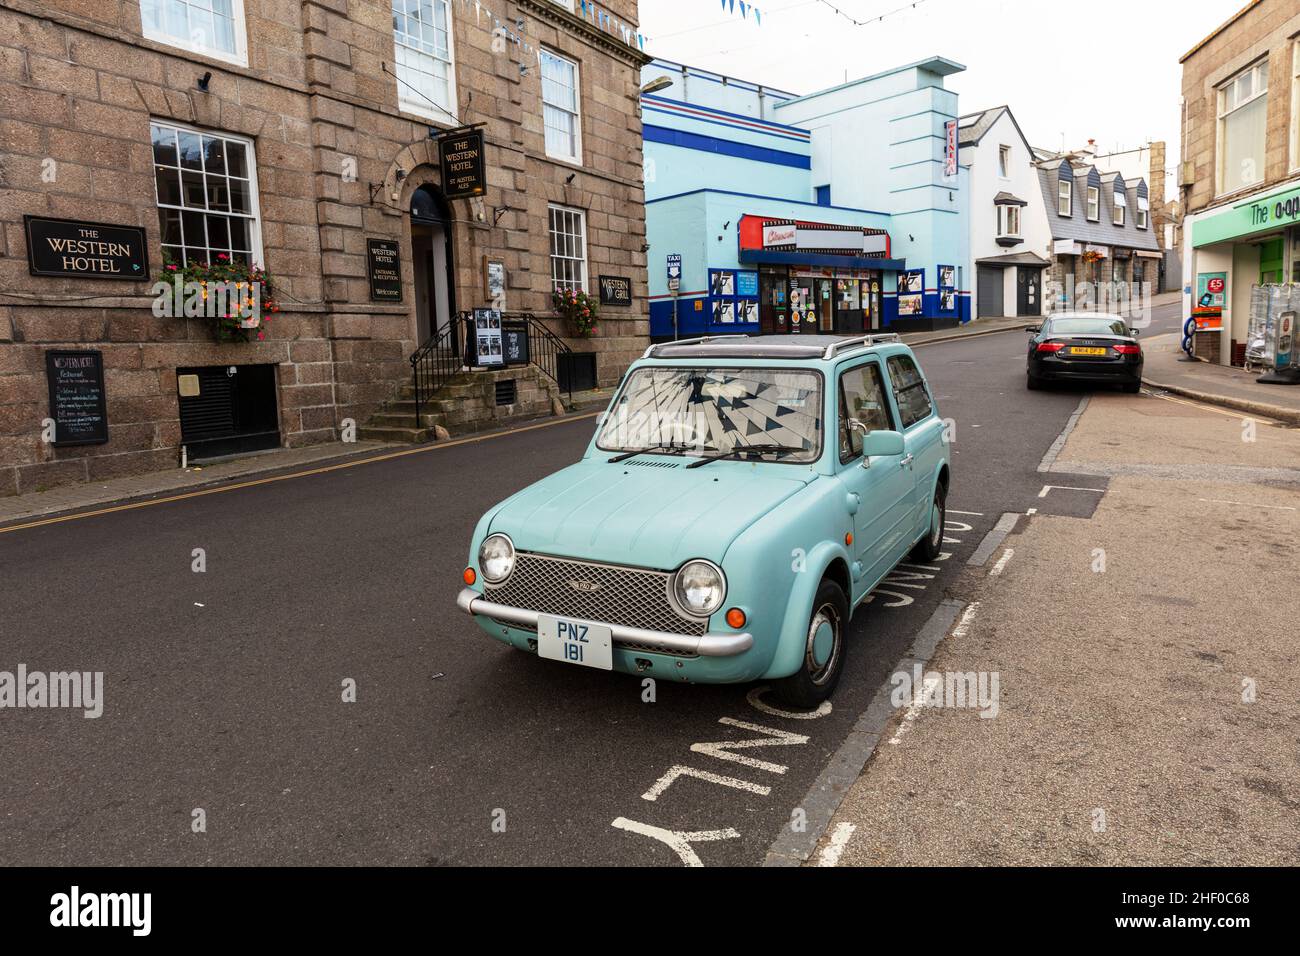 Nissan blue car parked, classic Nissan car, Blue Nissan, classic car, St Ives Cornwall, UK, classic cars, St Ives, Cornwall, England, Stock Photo